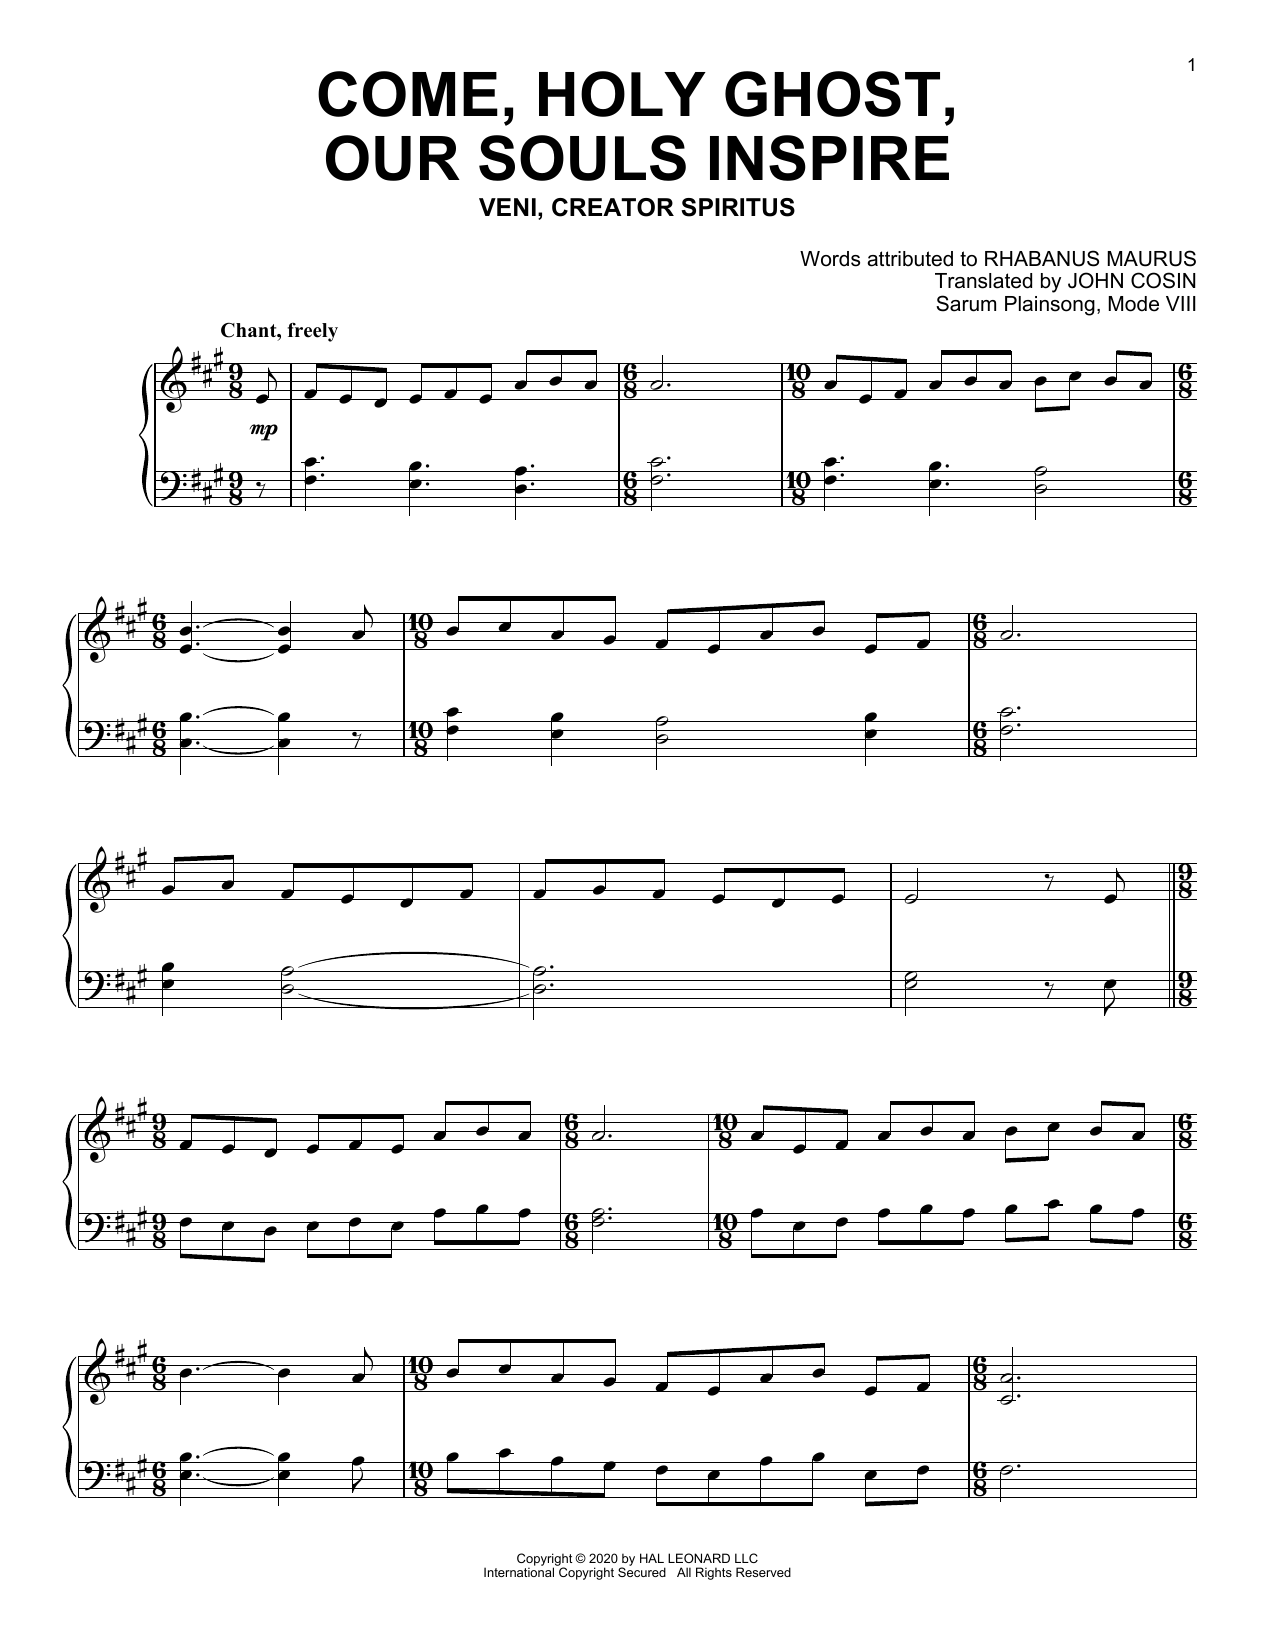 Download Sarum Plainsong Come, Holy Ghost, Our Souls Inspire Sheet Music